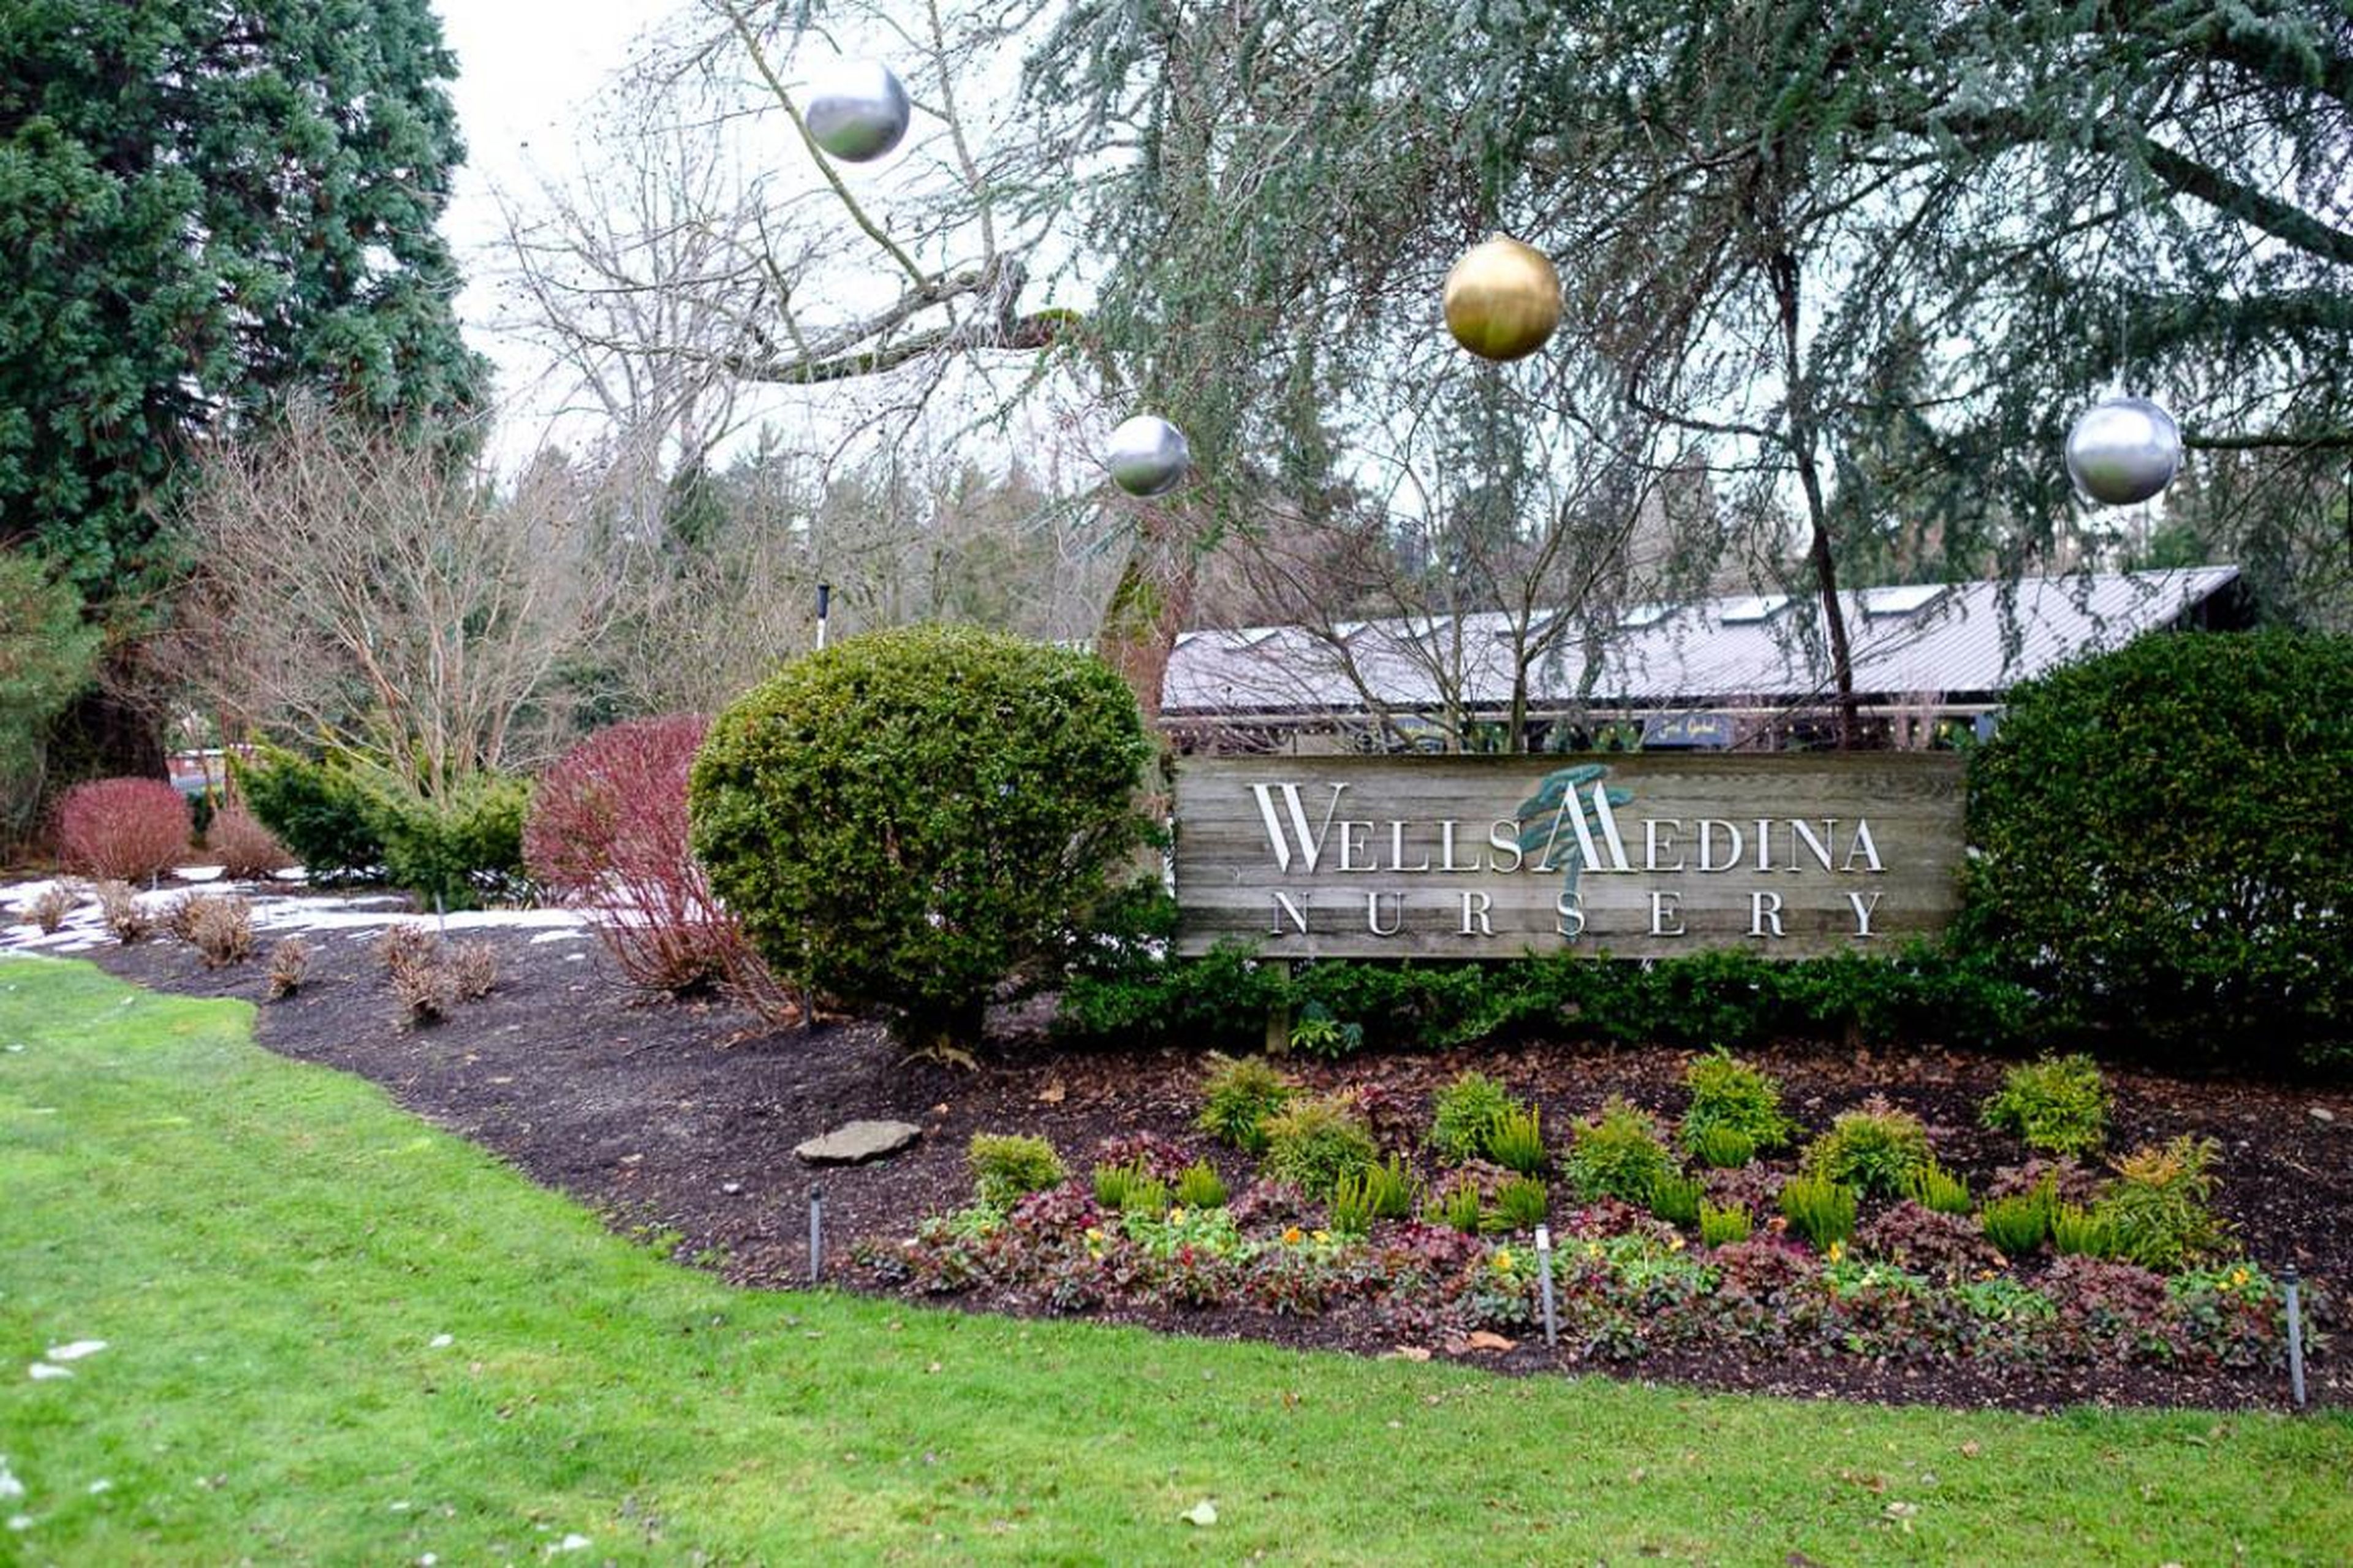 The Wells Medina Nursery, a plant store about a mile from the post office, is the only other store in town. Most shopping can be done in nearby Bellevue.